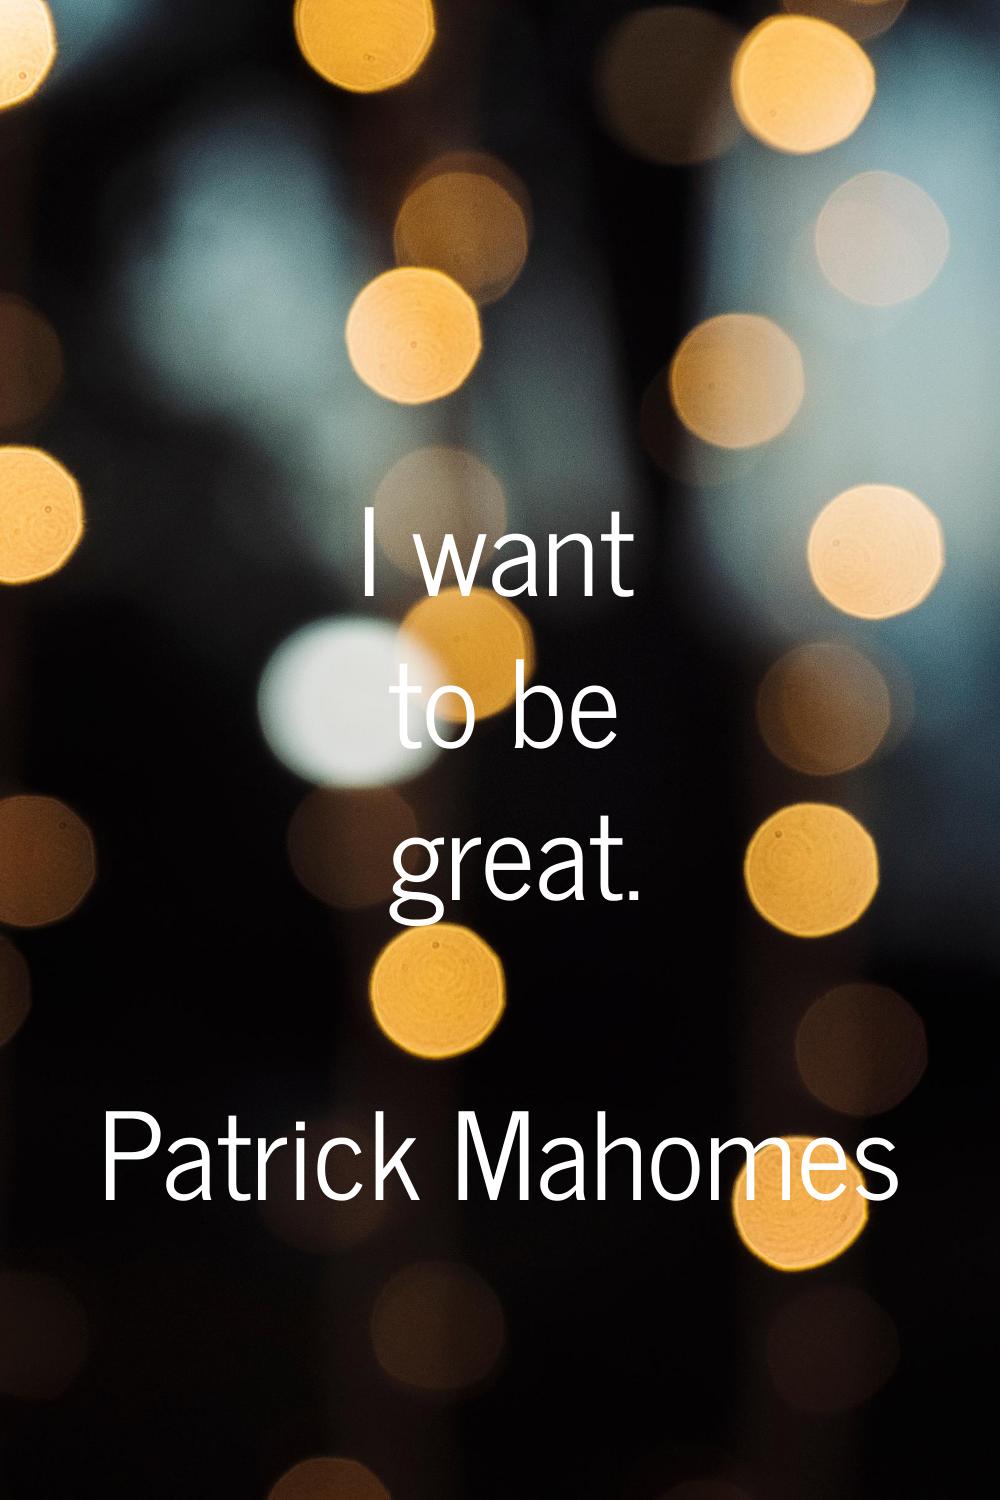 I want to be great.